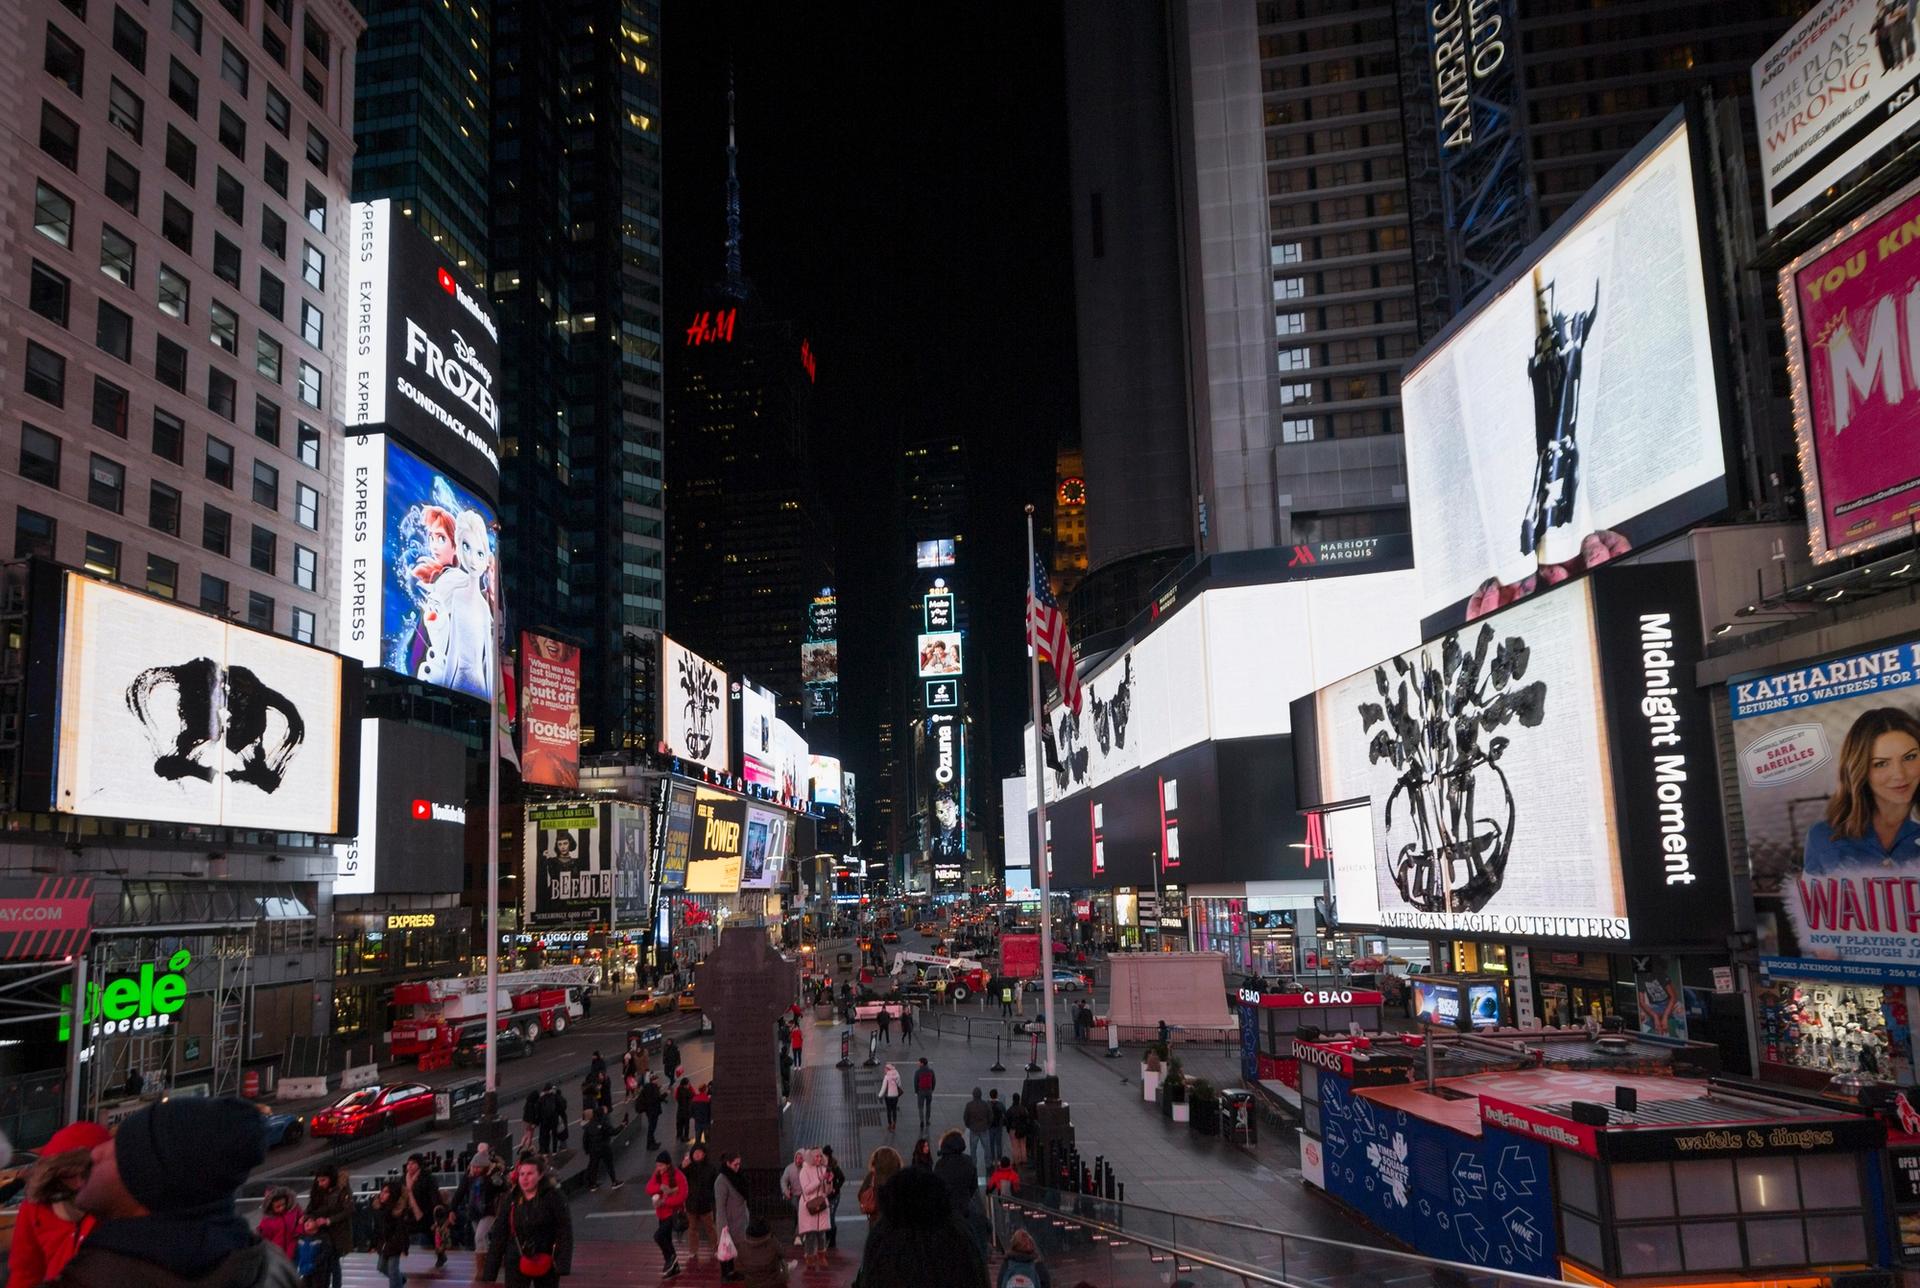 View of William Kentridge's "To What End?" Image Credit: Ka-Man Tse for Times Square Arts.